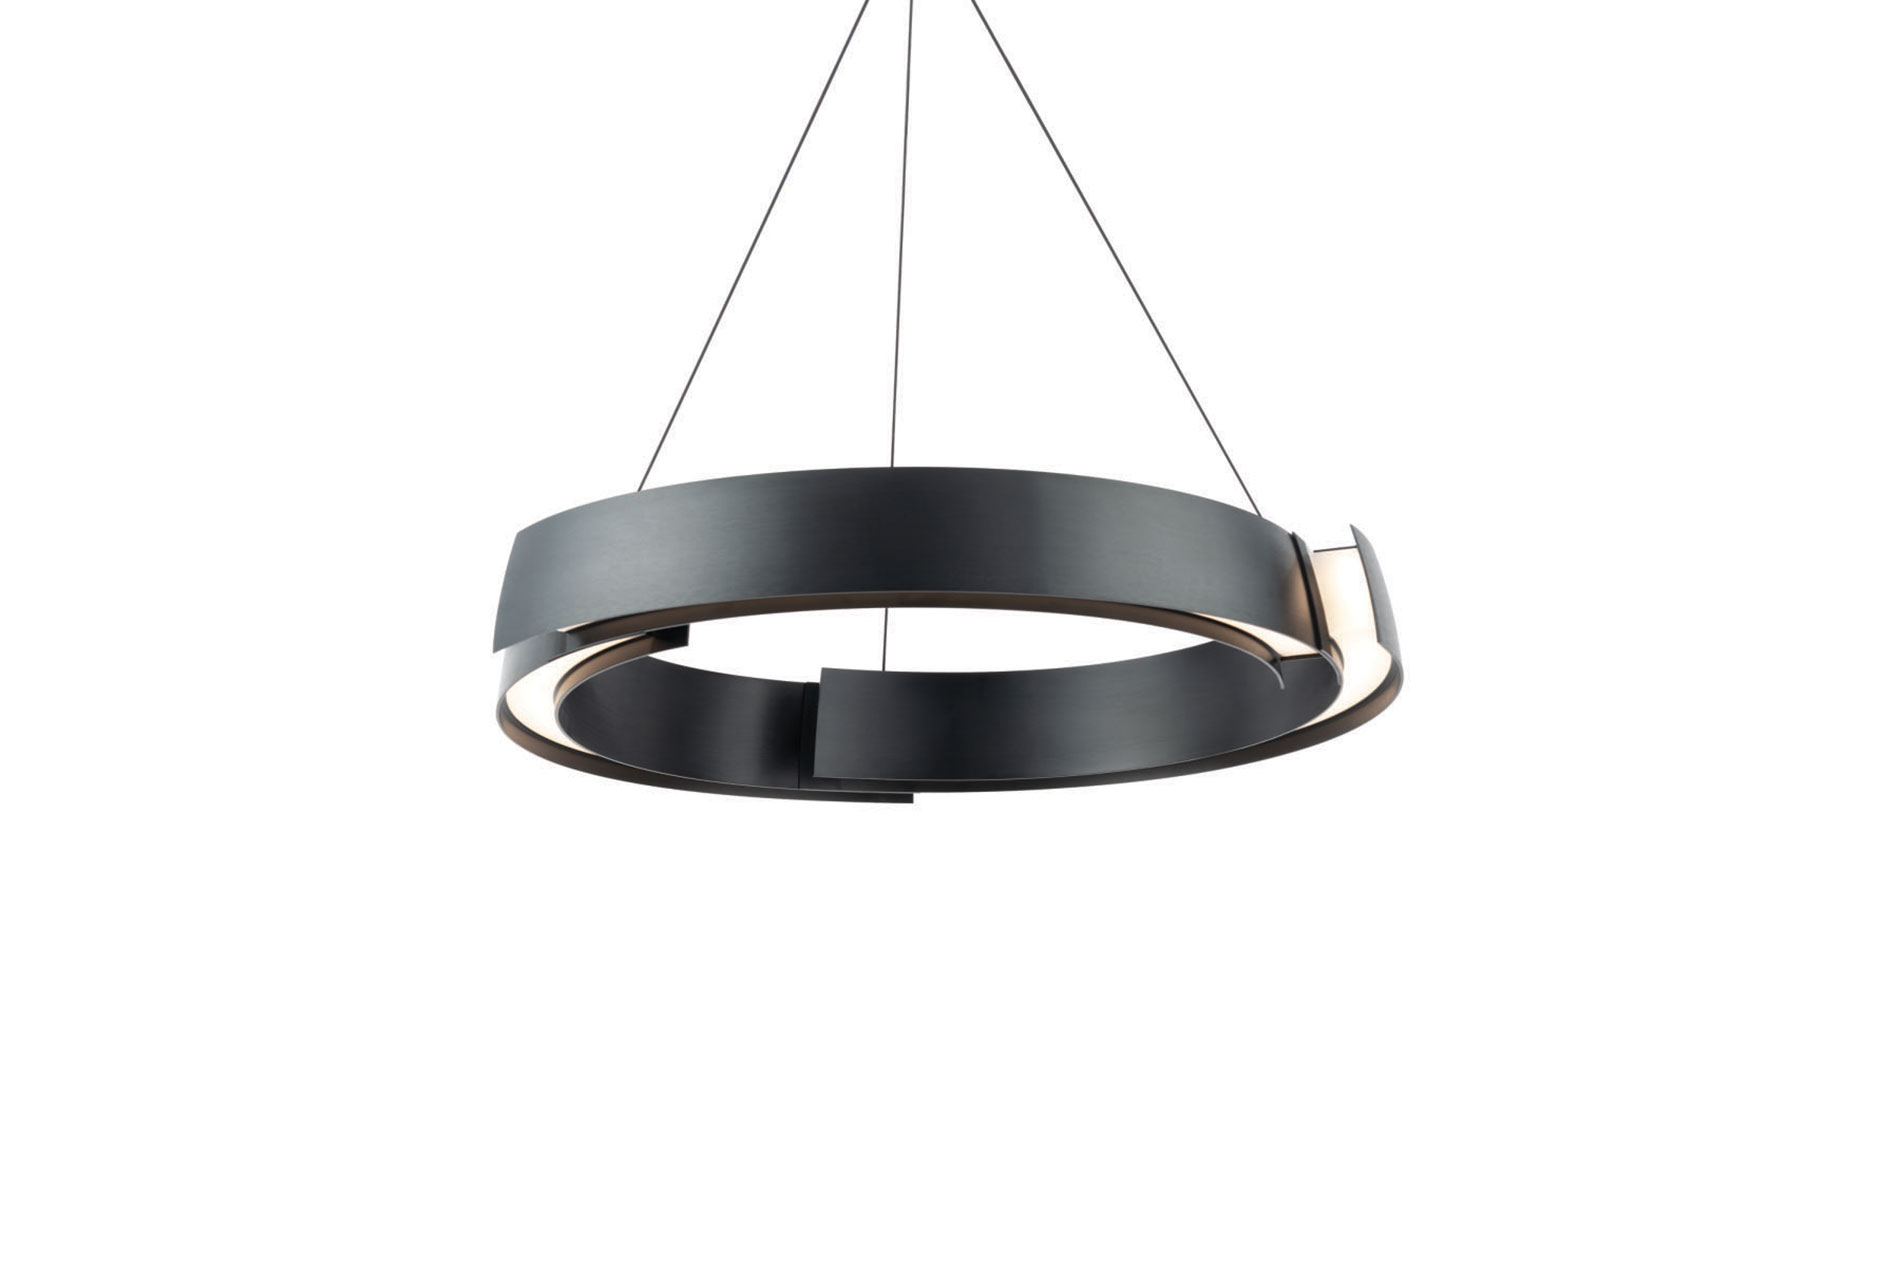 Black round chandelier. Image by Modern Forms.